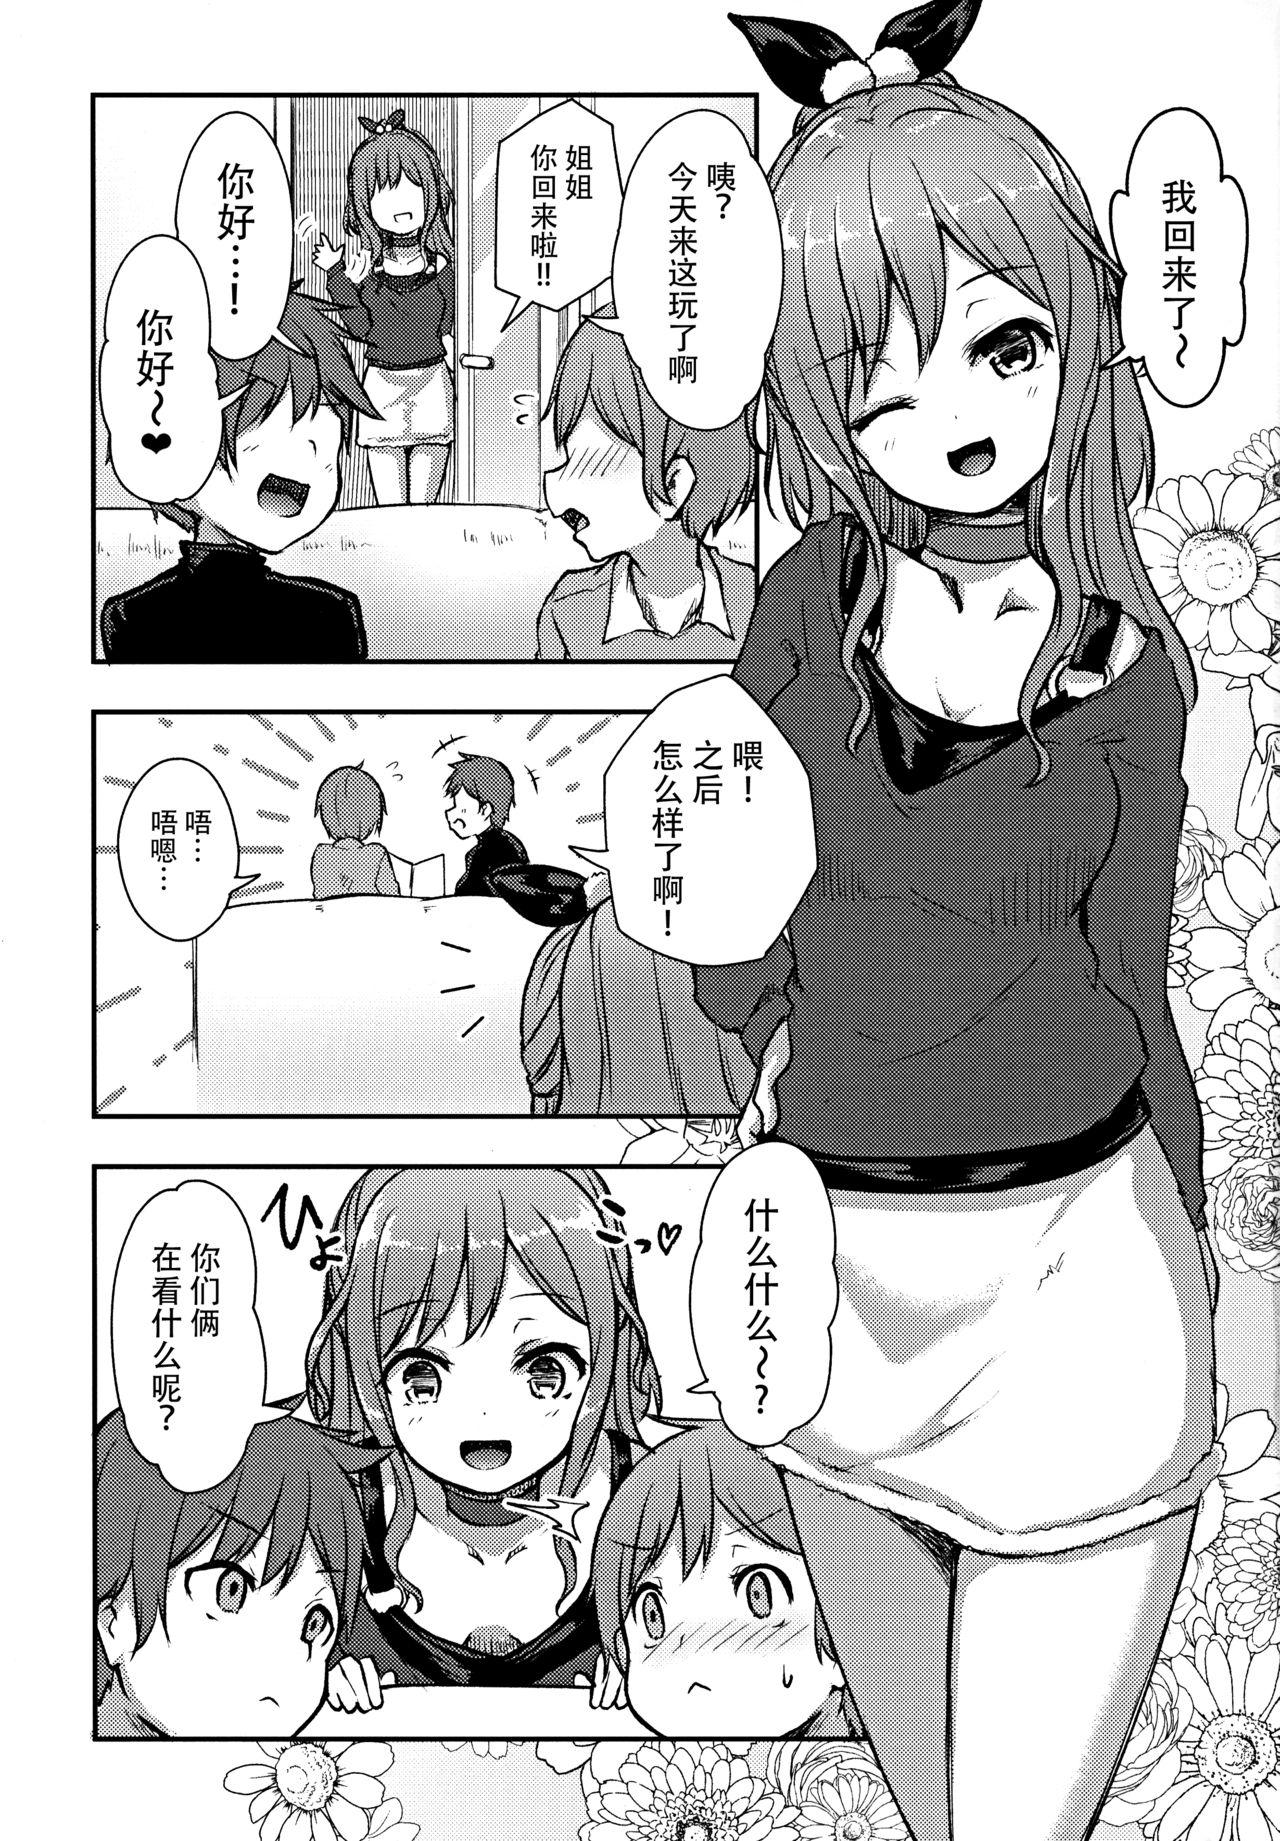 Gonzo Hearty Hybrid Household - Bang dream Gay Cash - Page 3